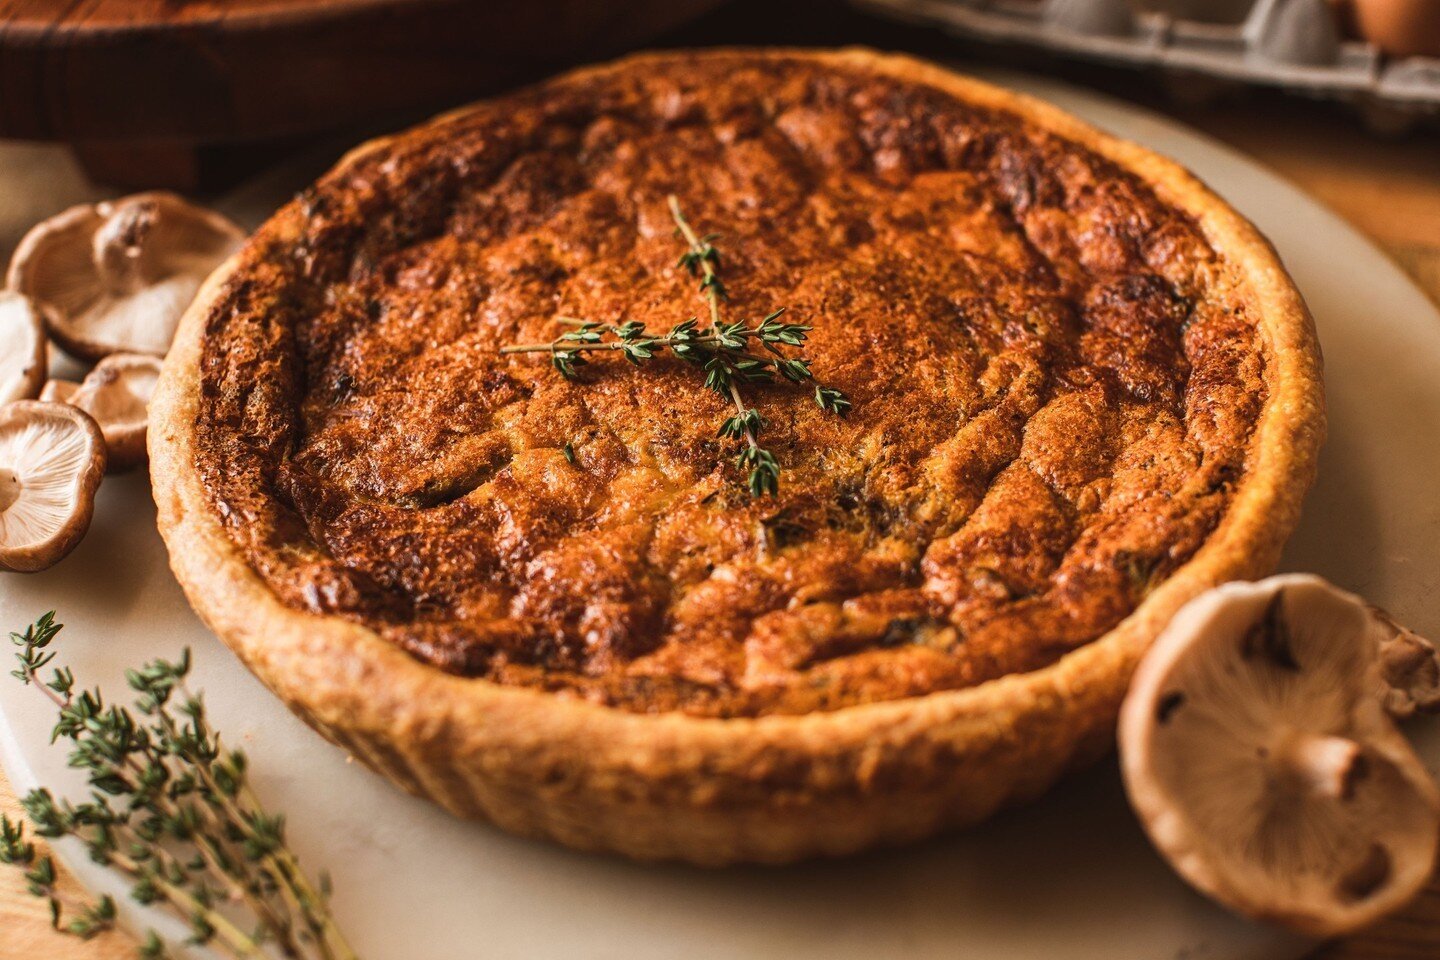 Easy, delicious, anytime! Our Mushroom Quiche, with local pastured eggs from Sequatchie Cove Farm and Midway Mushrooms' shiitakes, is perfect for any meal. Craving something meatier? Our Meat Quiche features local Main St Meats Ham. Breakfast, lunch,